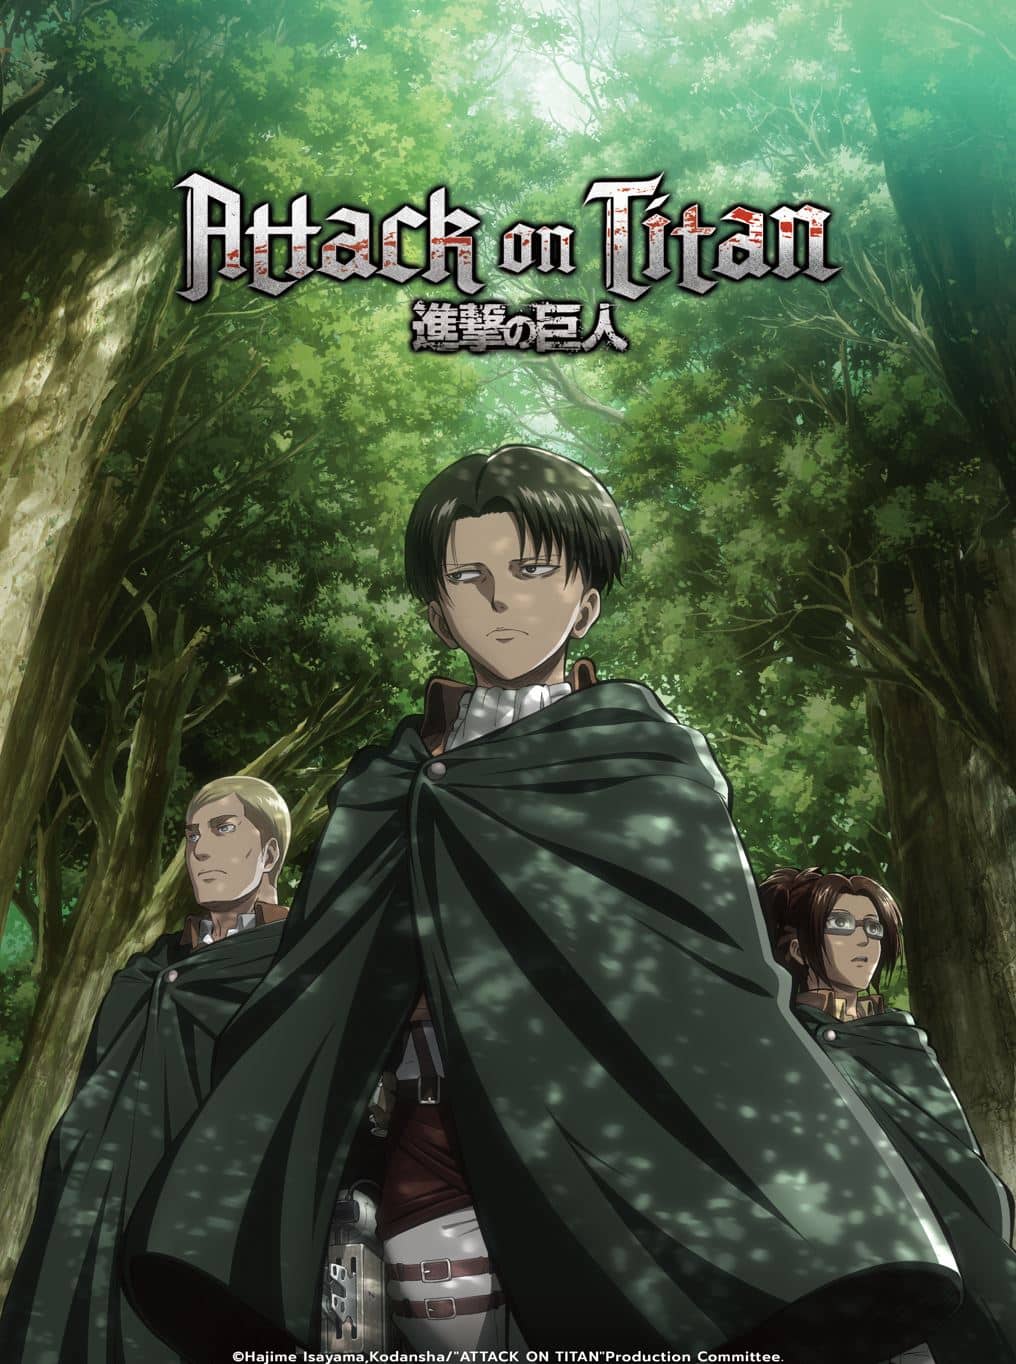 When Is Attack on Titan Season 4 Part 2 Coming To Netflix?